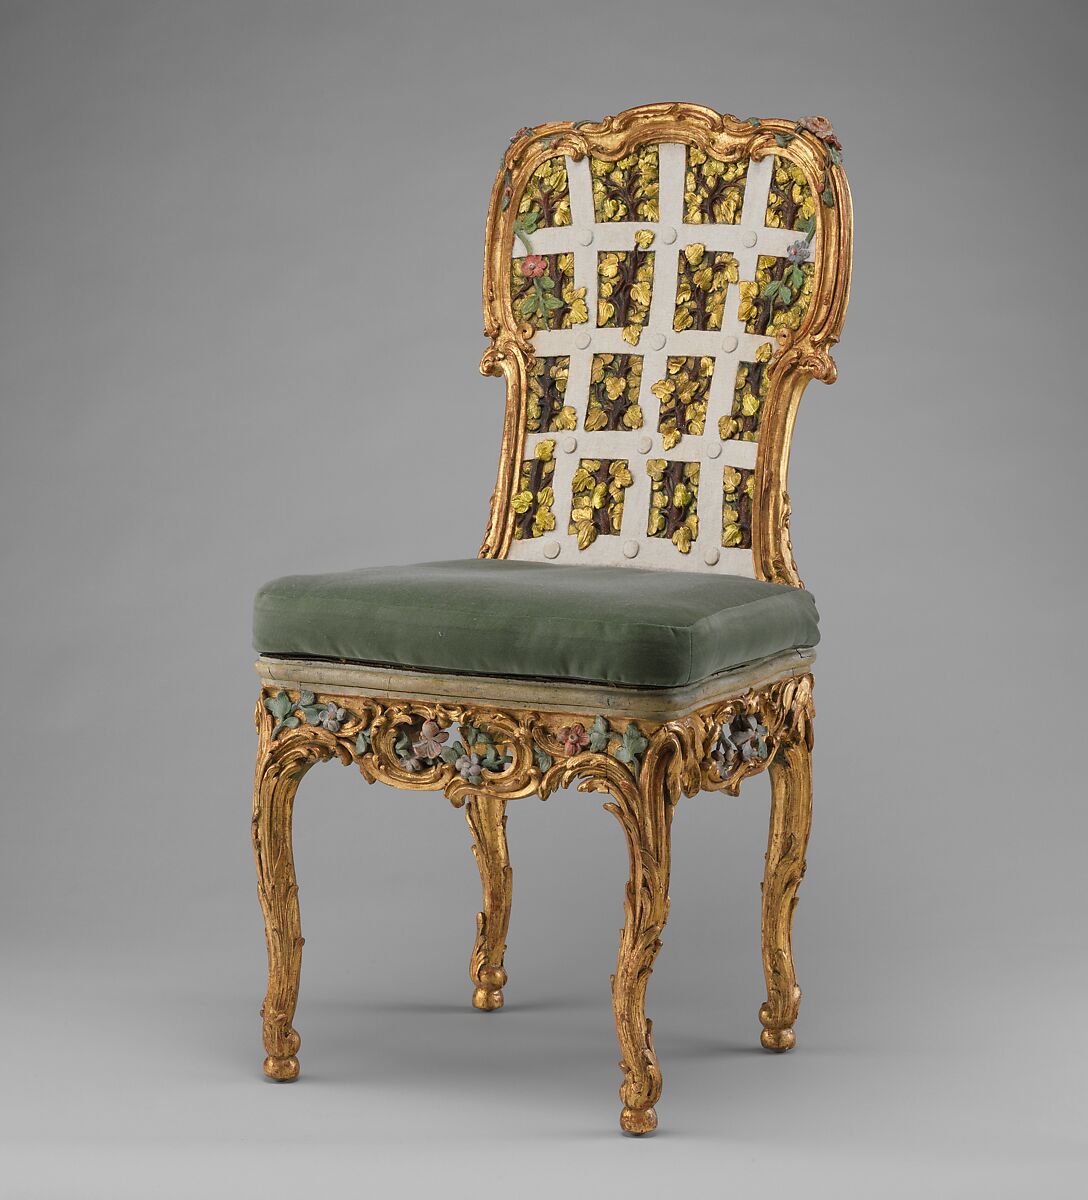 Side chair (one of four) (part of a set), Carved, painted and gilded limewood; squab pillow in silk velvet (not original), German, Würzburg 